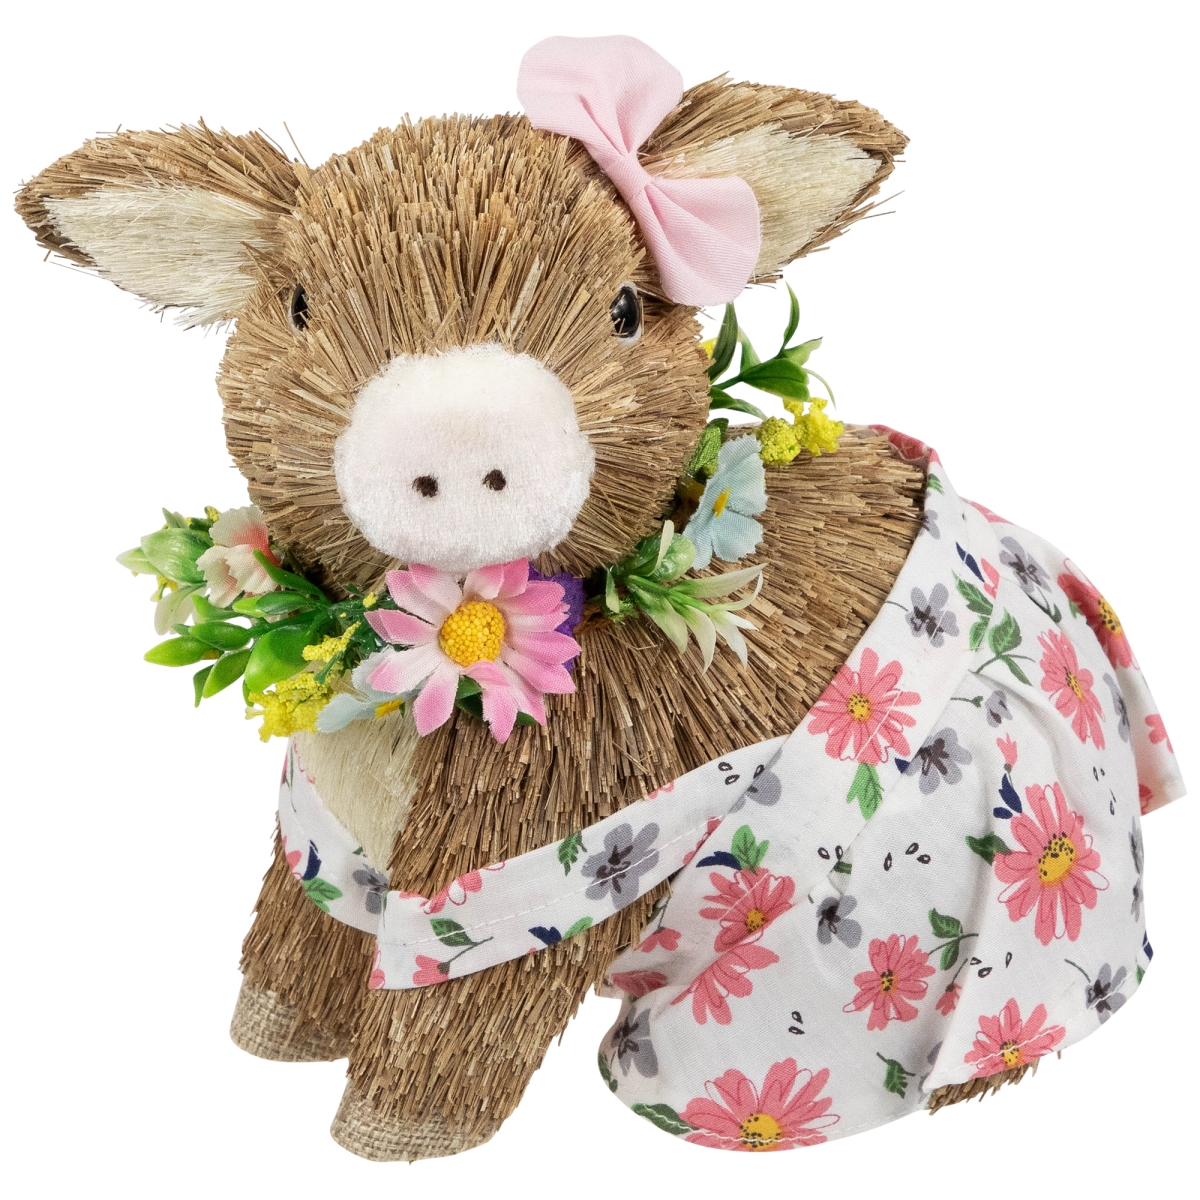 Picture of Northlight 35737331 7 x 7 x 5 in. Girl Piglet with Floral Dress Spring Figurine